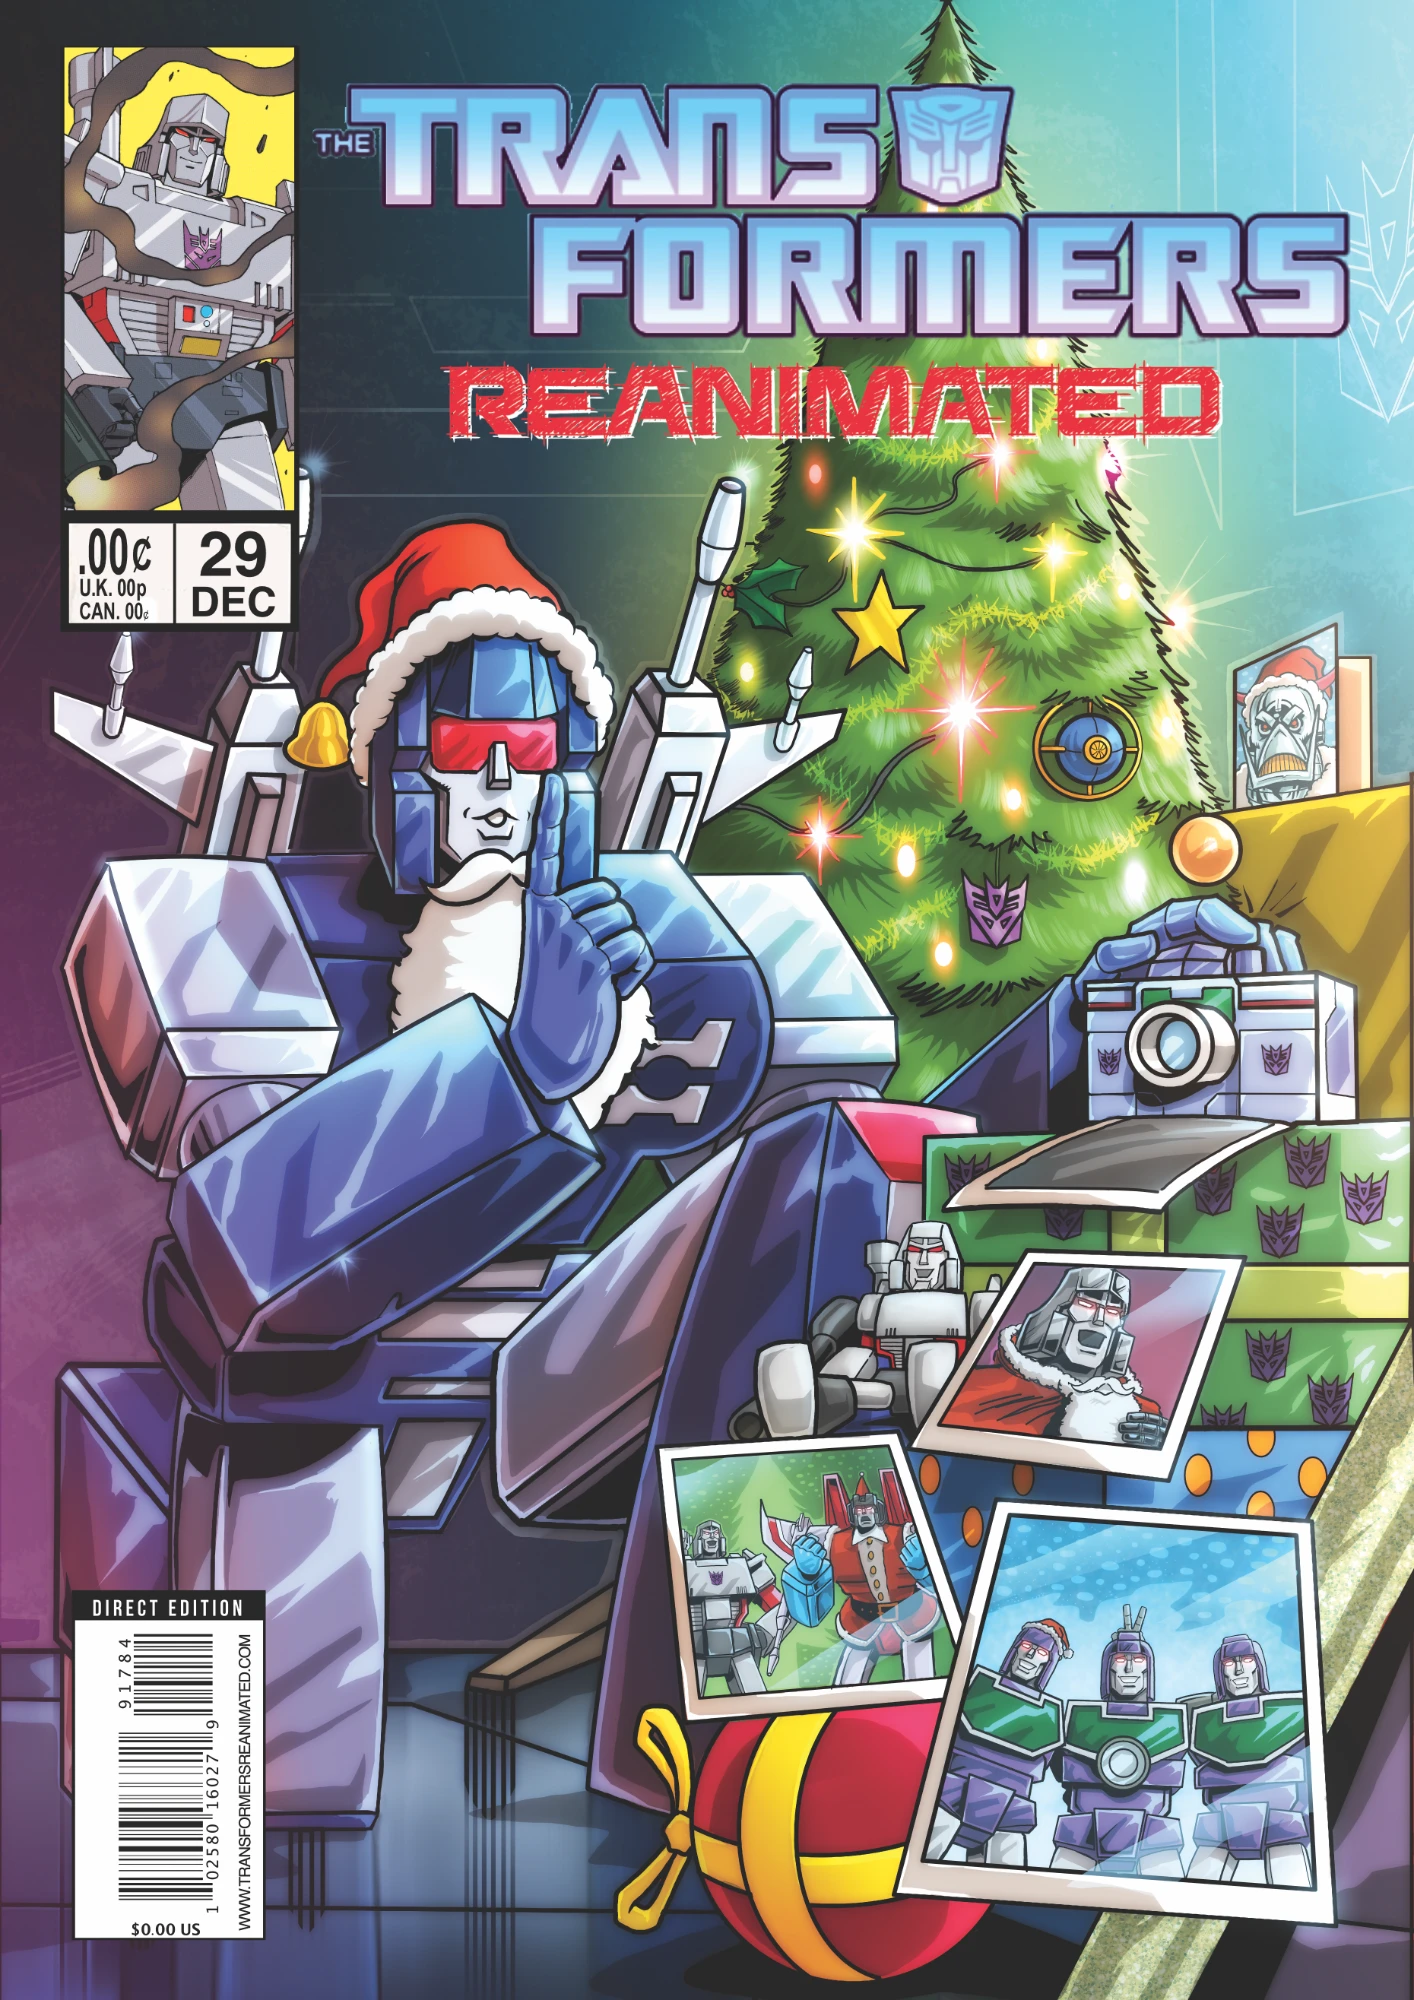 Transformers comic cover with Reflector by a Christmas tree